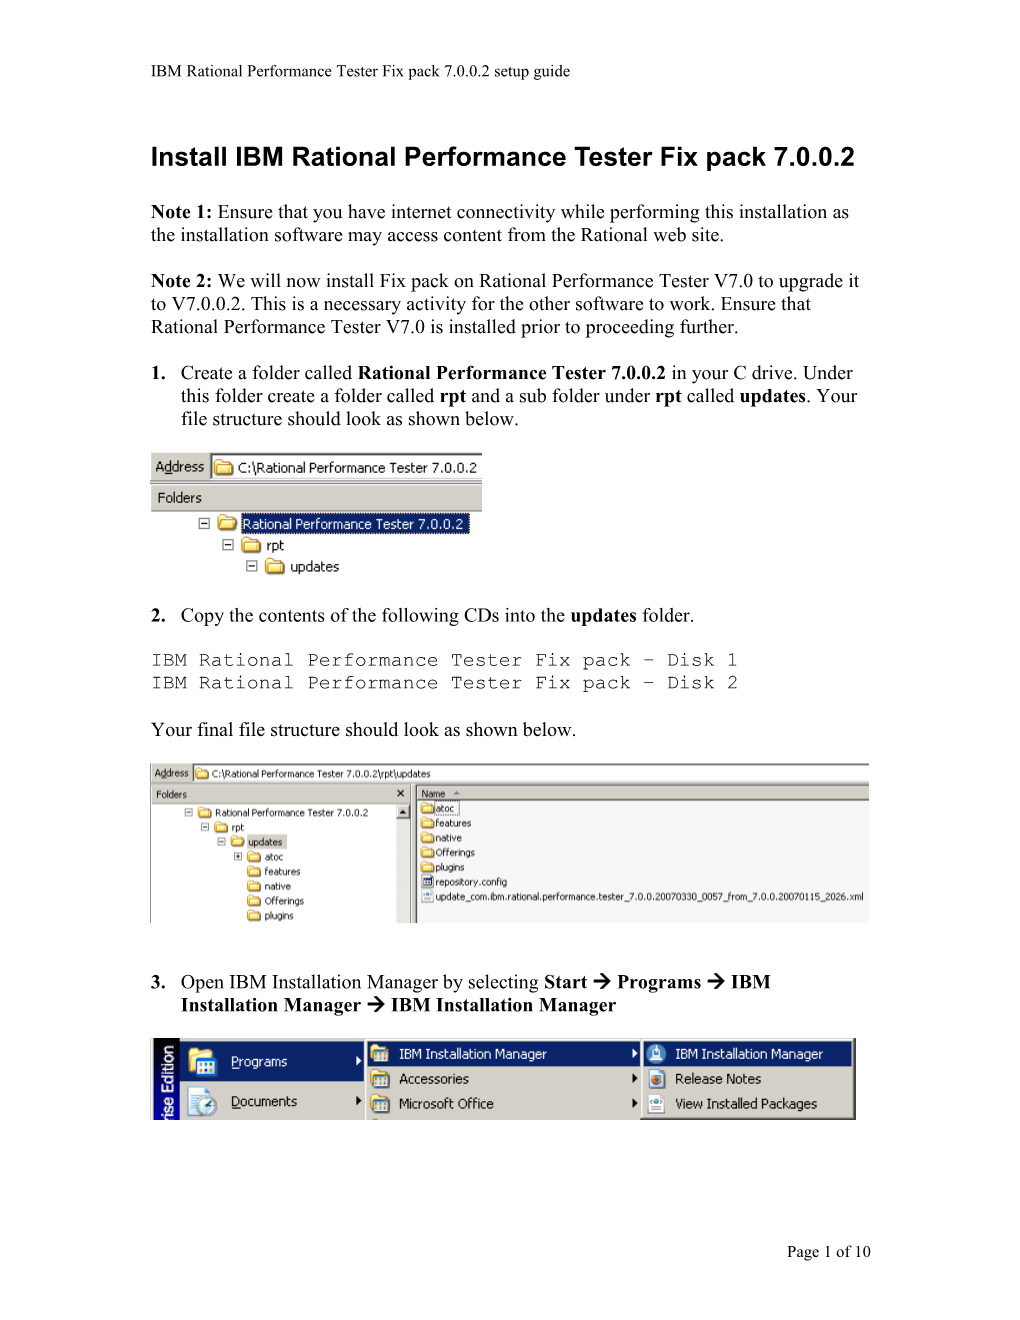 Install IBM Rational Performance Tester Fix Pack 7